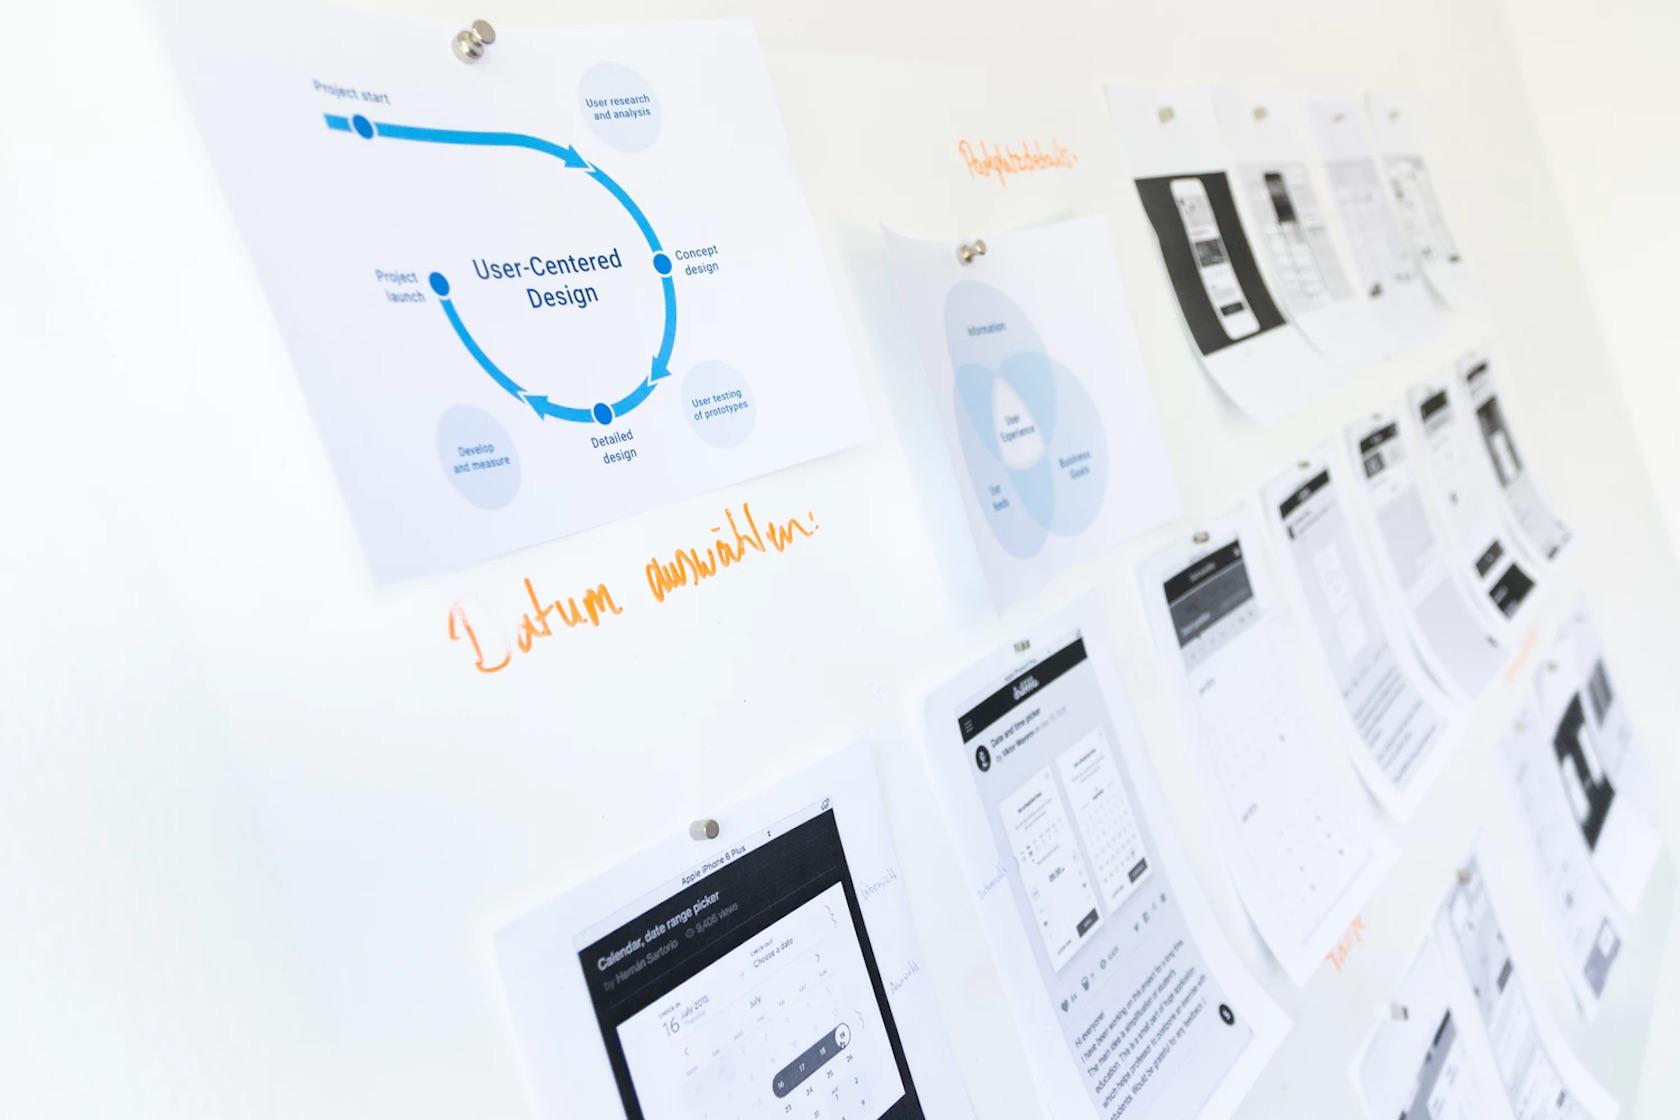 Learning to create wireframes - teach yourself UX design